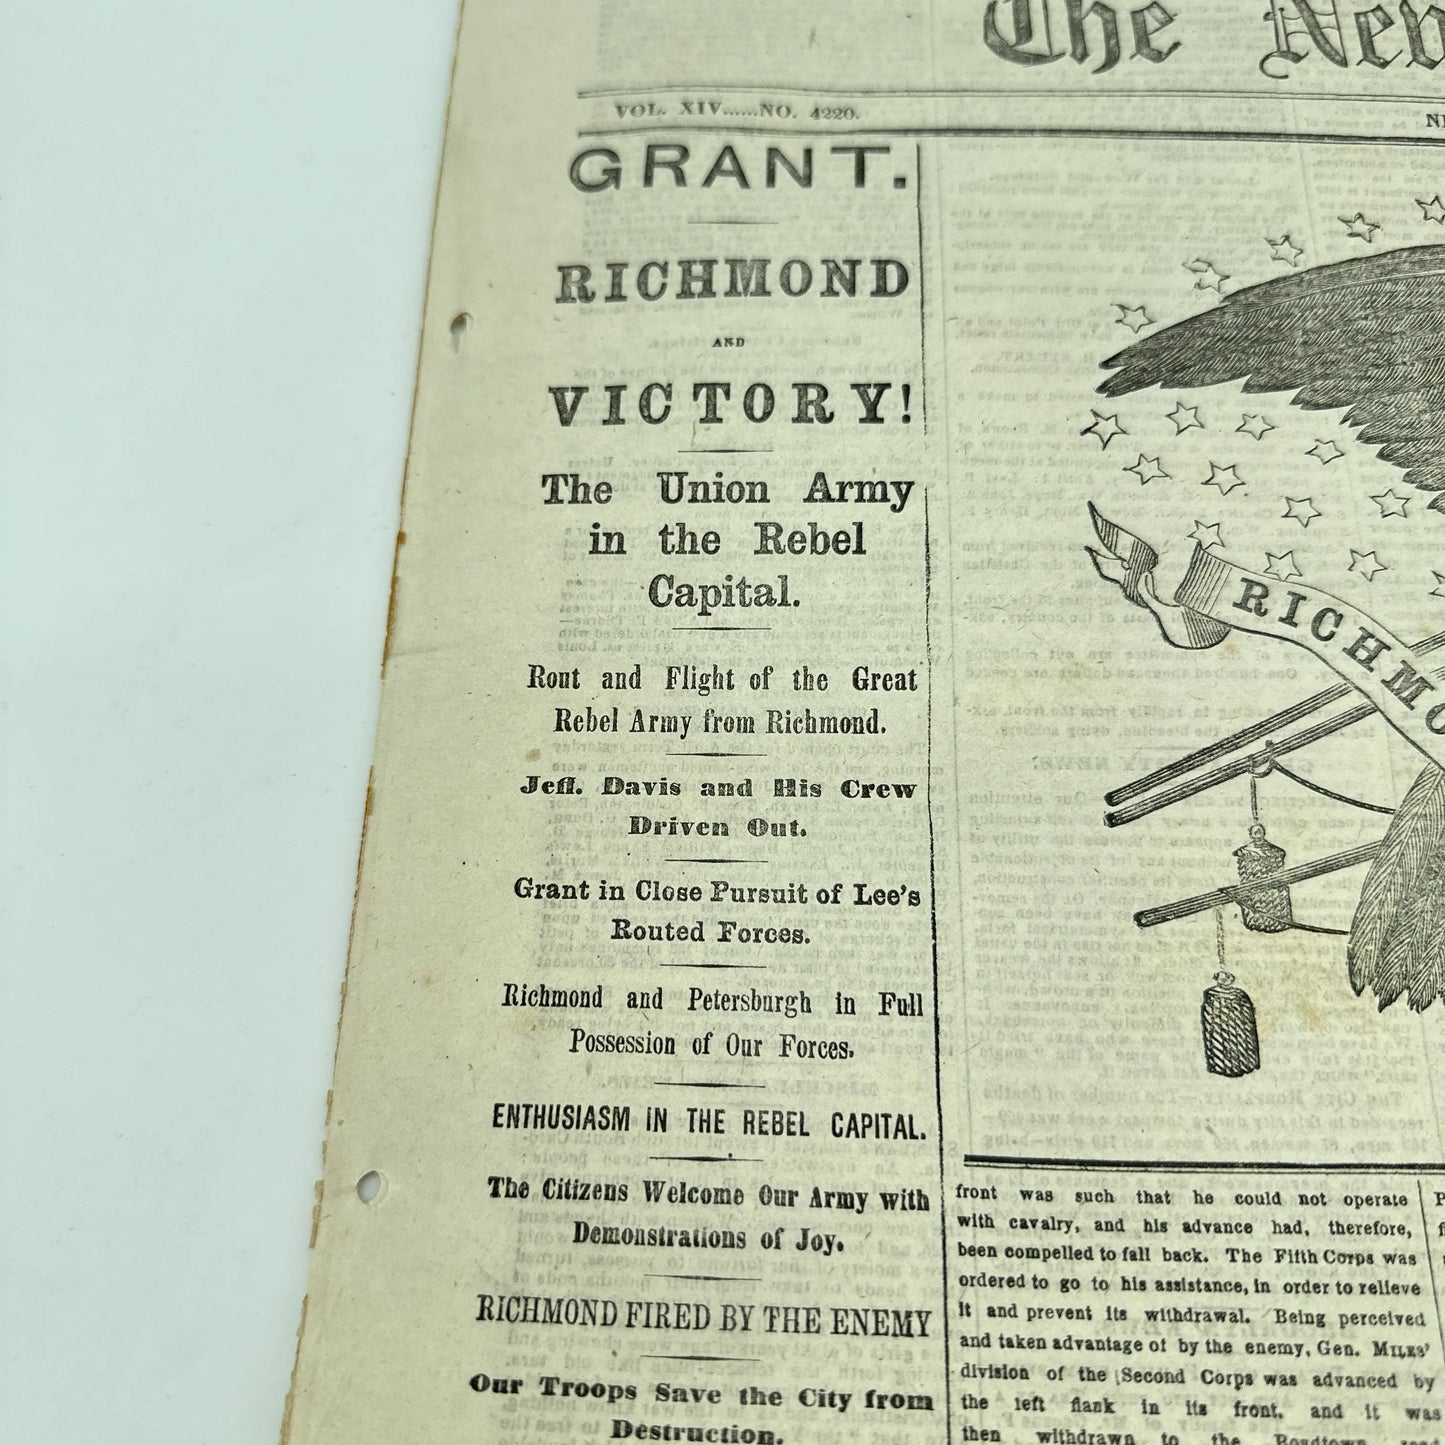 "The New-York Times" reporting on General Grant and the Fall of Richmond — New York, April 4, 1865